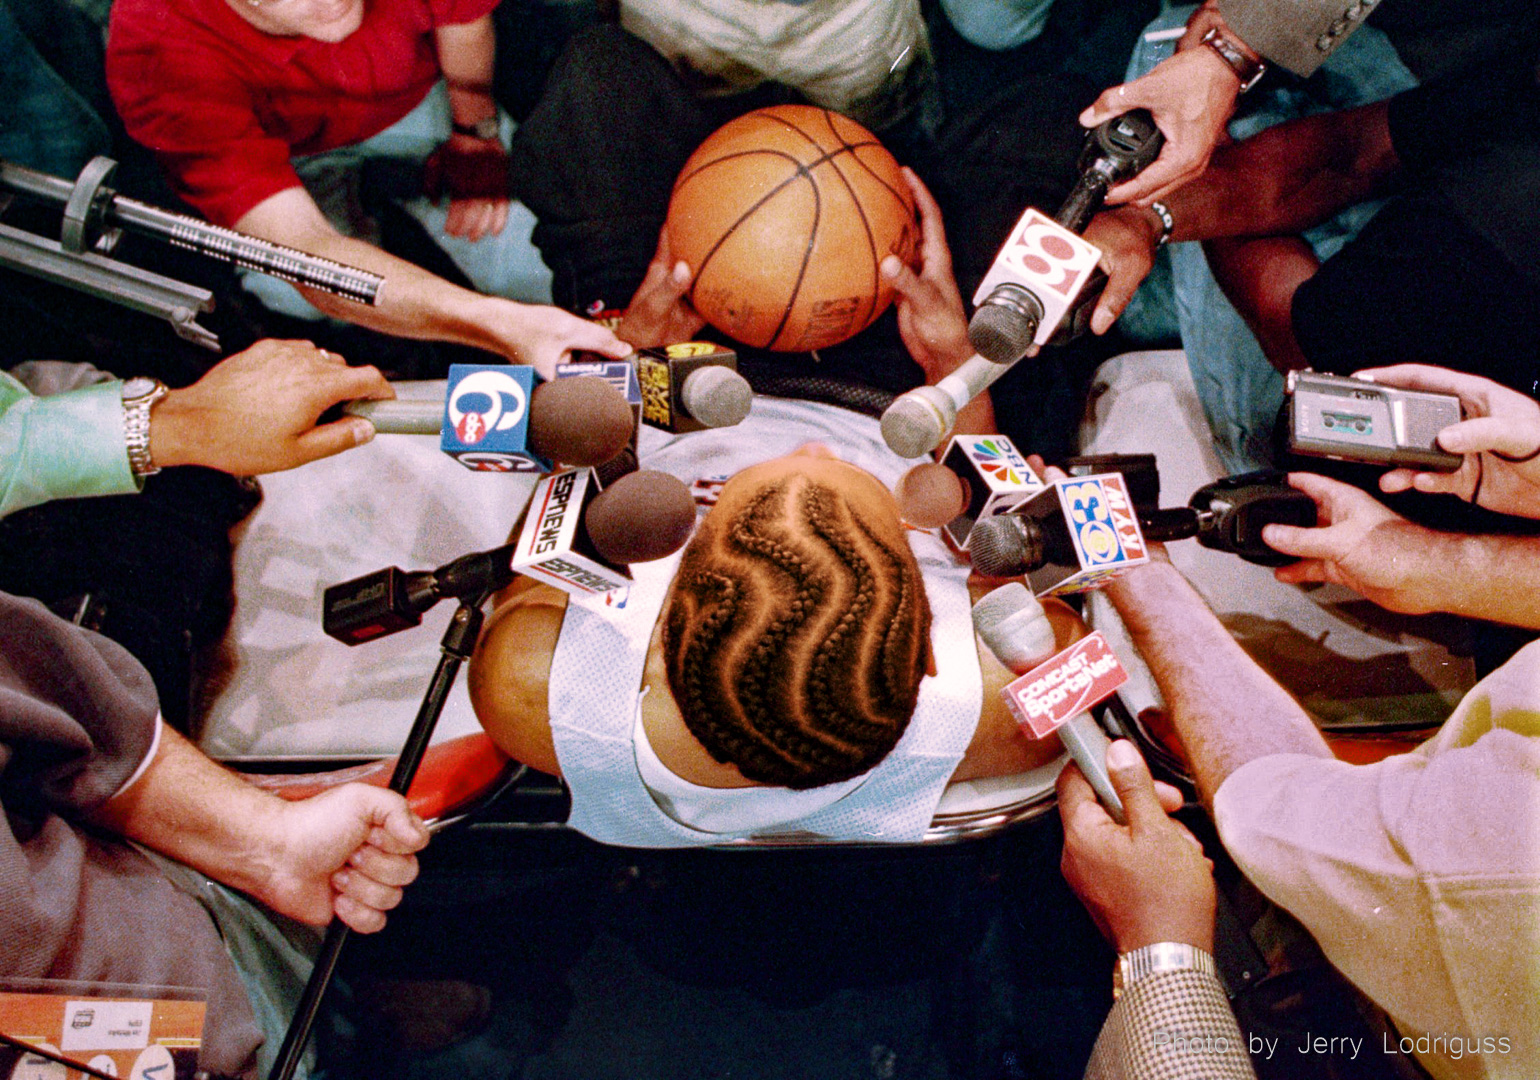 Sixer's Allen Iverson talks with the media after practice here today in Indianapolis, IN on May 18, 1999. Iveron's corn rows revolutionized hair styles in the NBA.